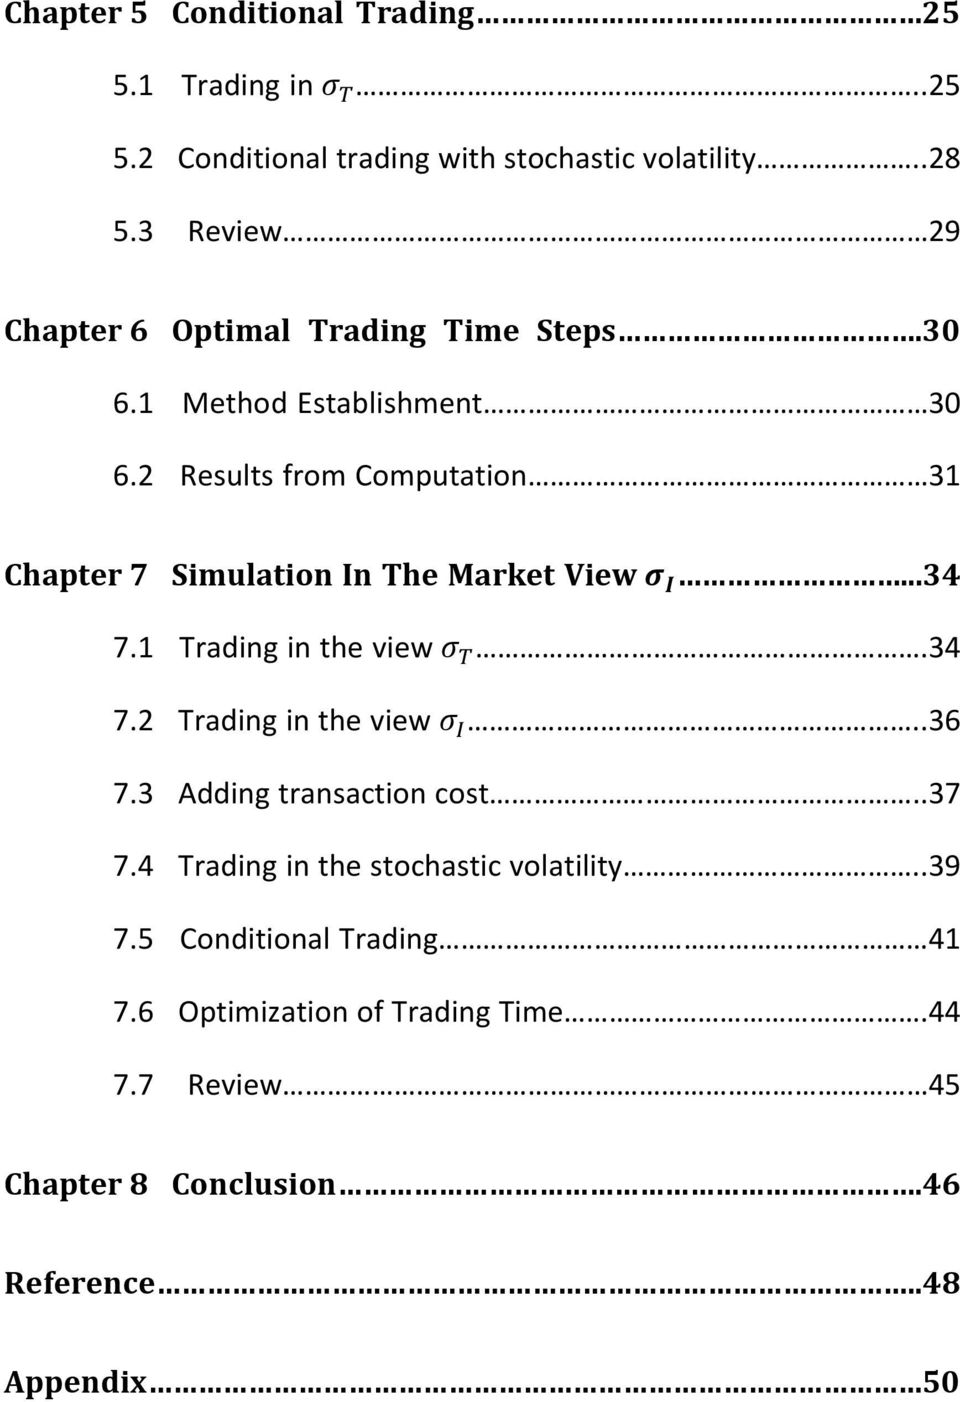 2 Results from Computation 31 Chapter 7 Simulation In The Market View...34 7.1 Trading in the view.34 7.2 Trading in the view..36 7.